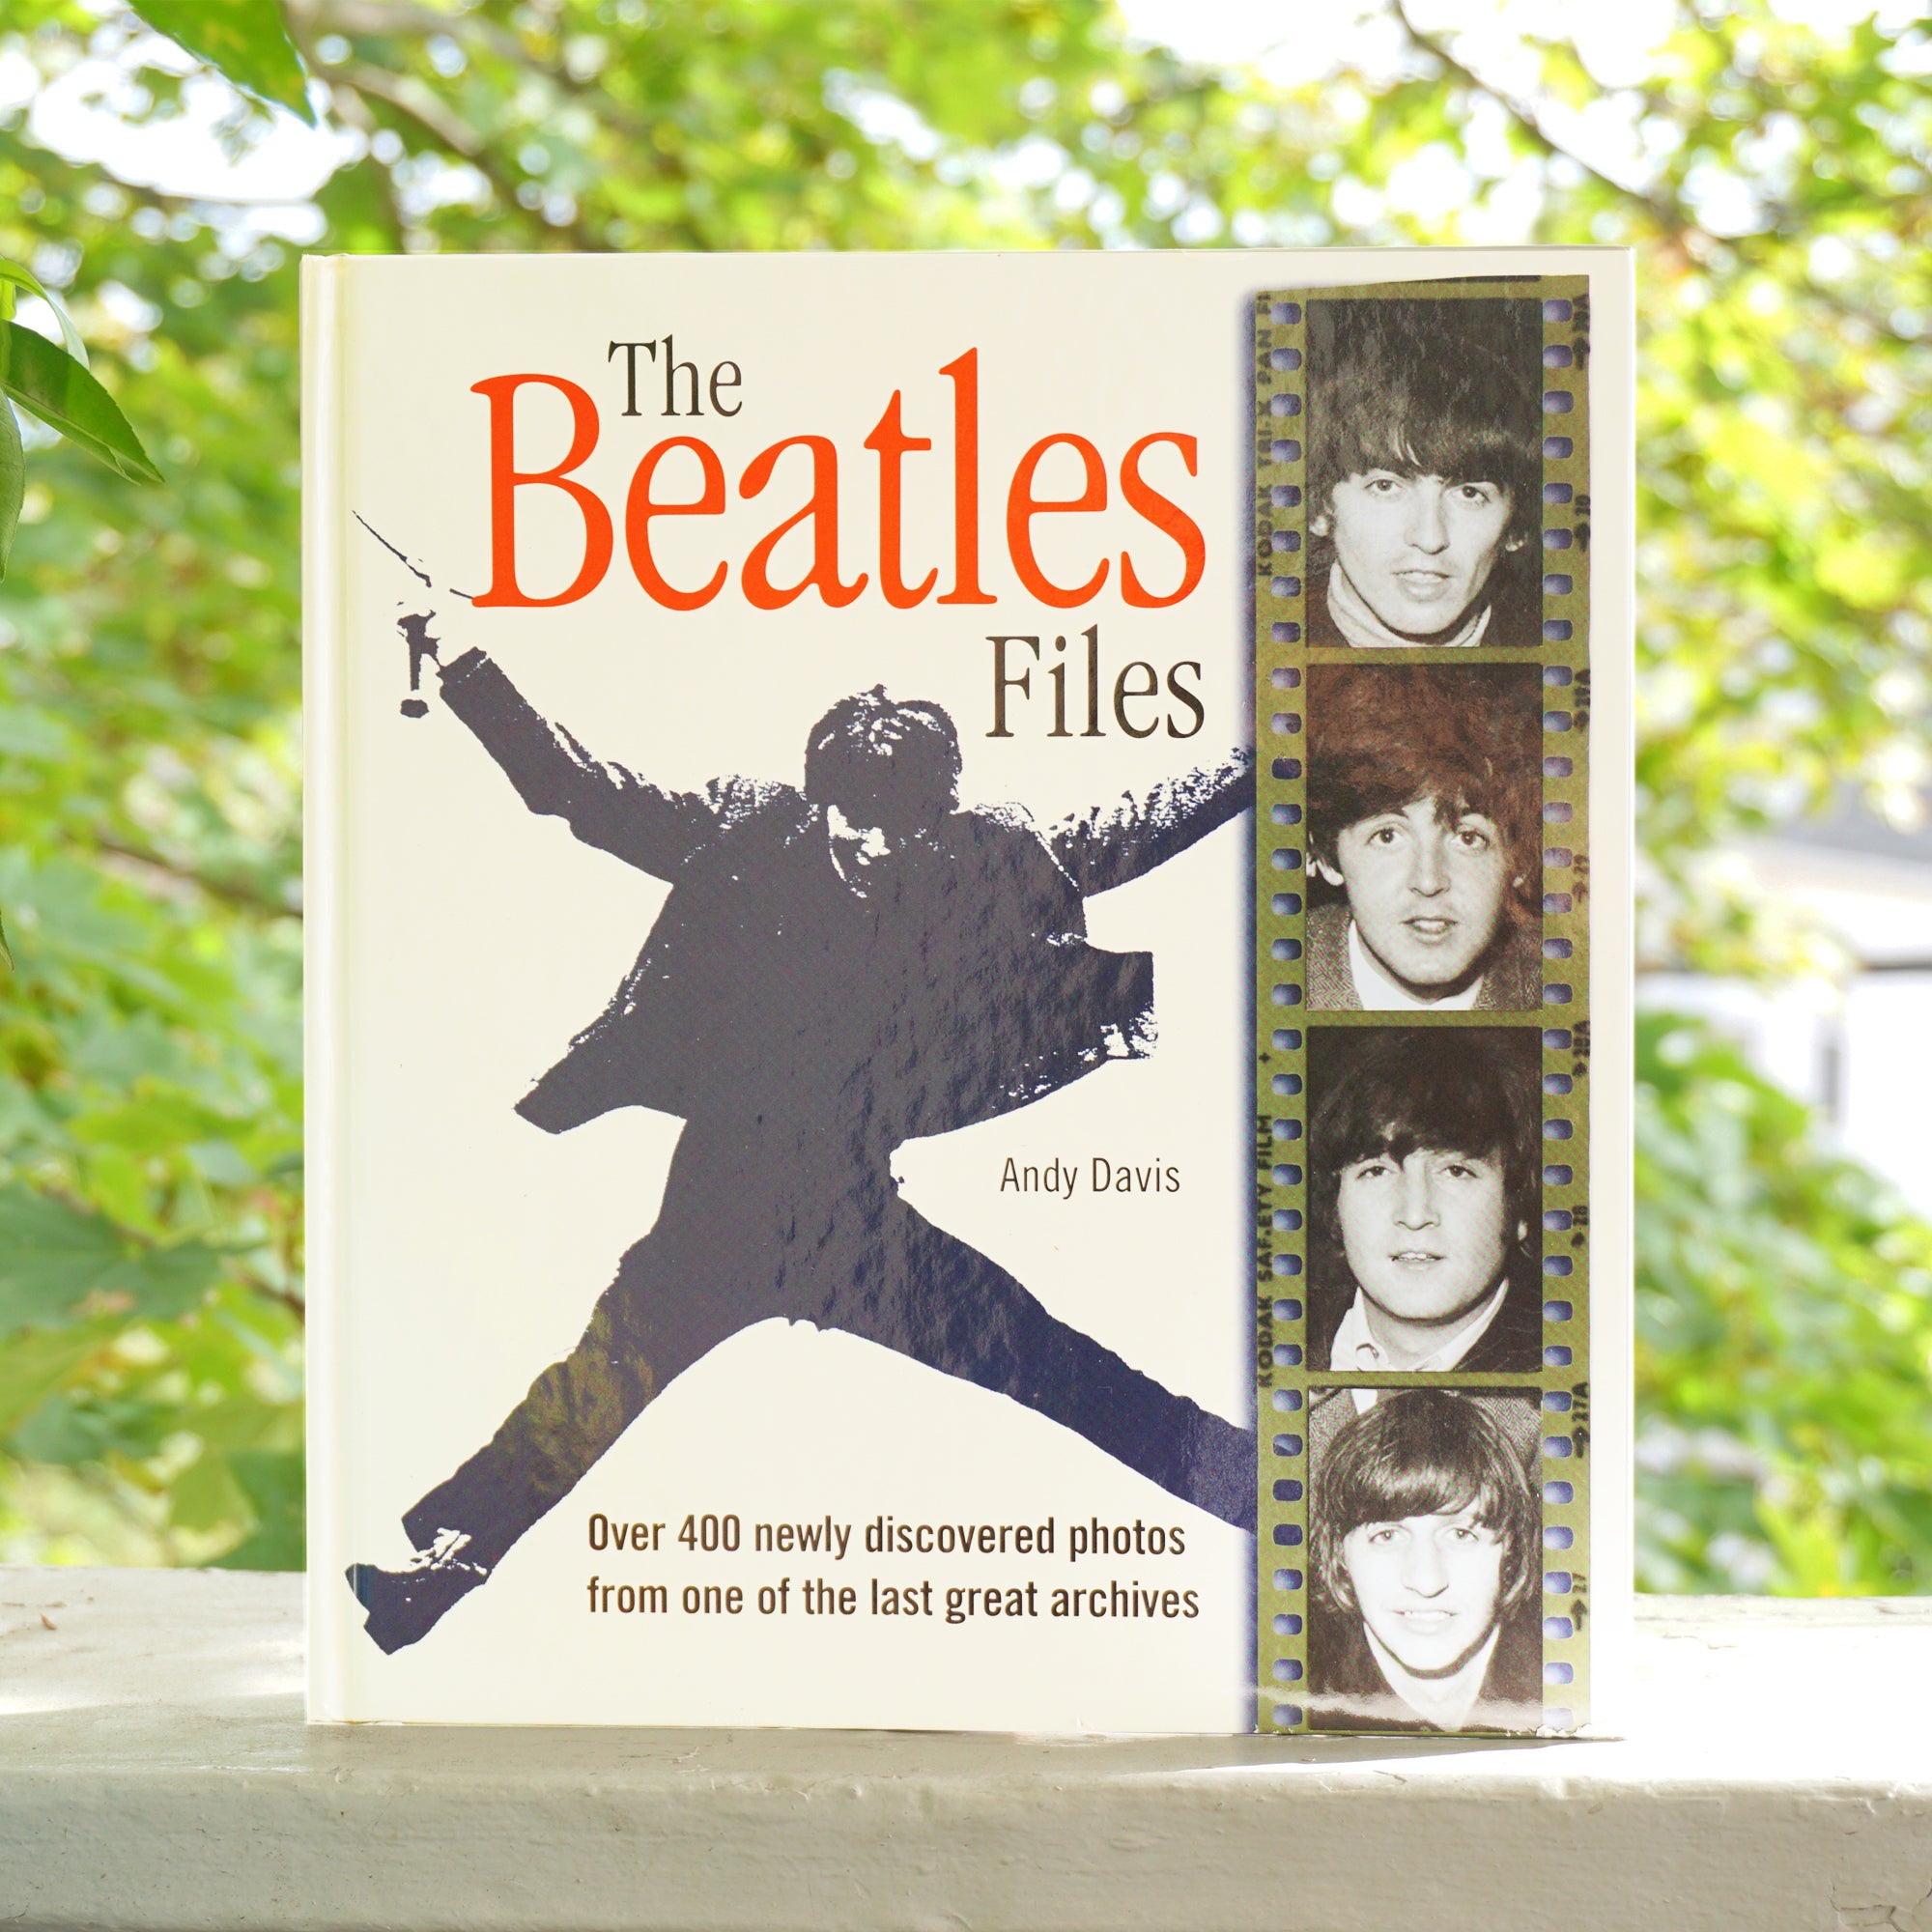 Tell Me Why: A Beatles Commentary, Tim Riley